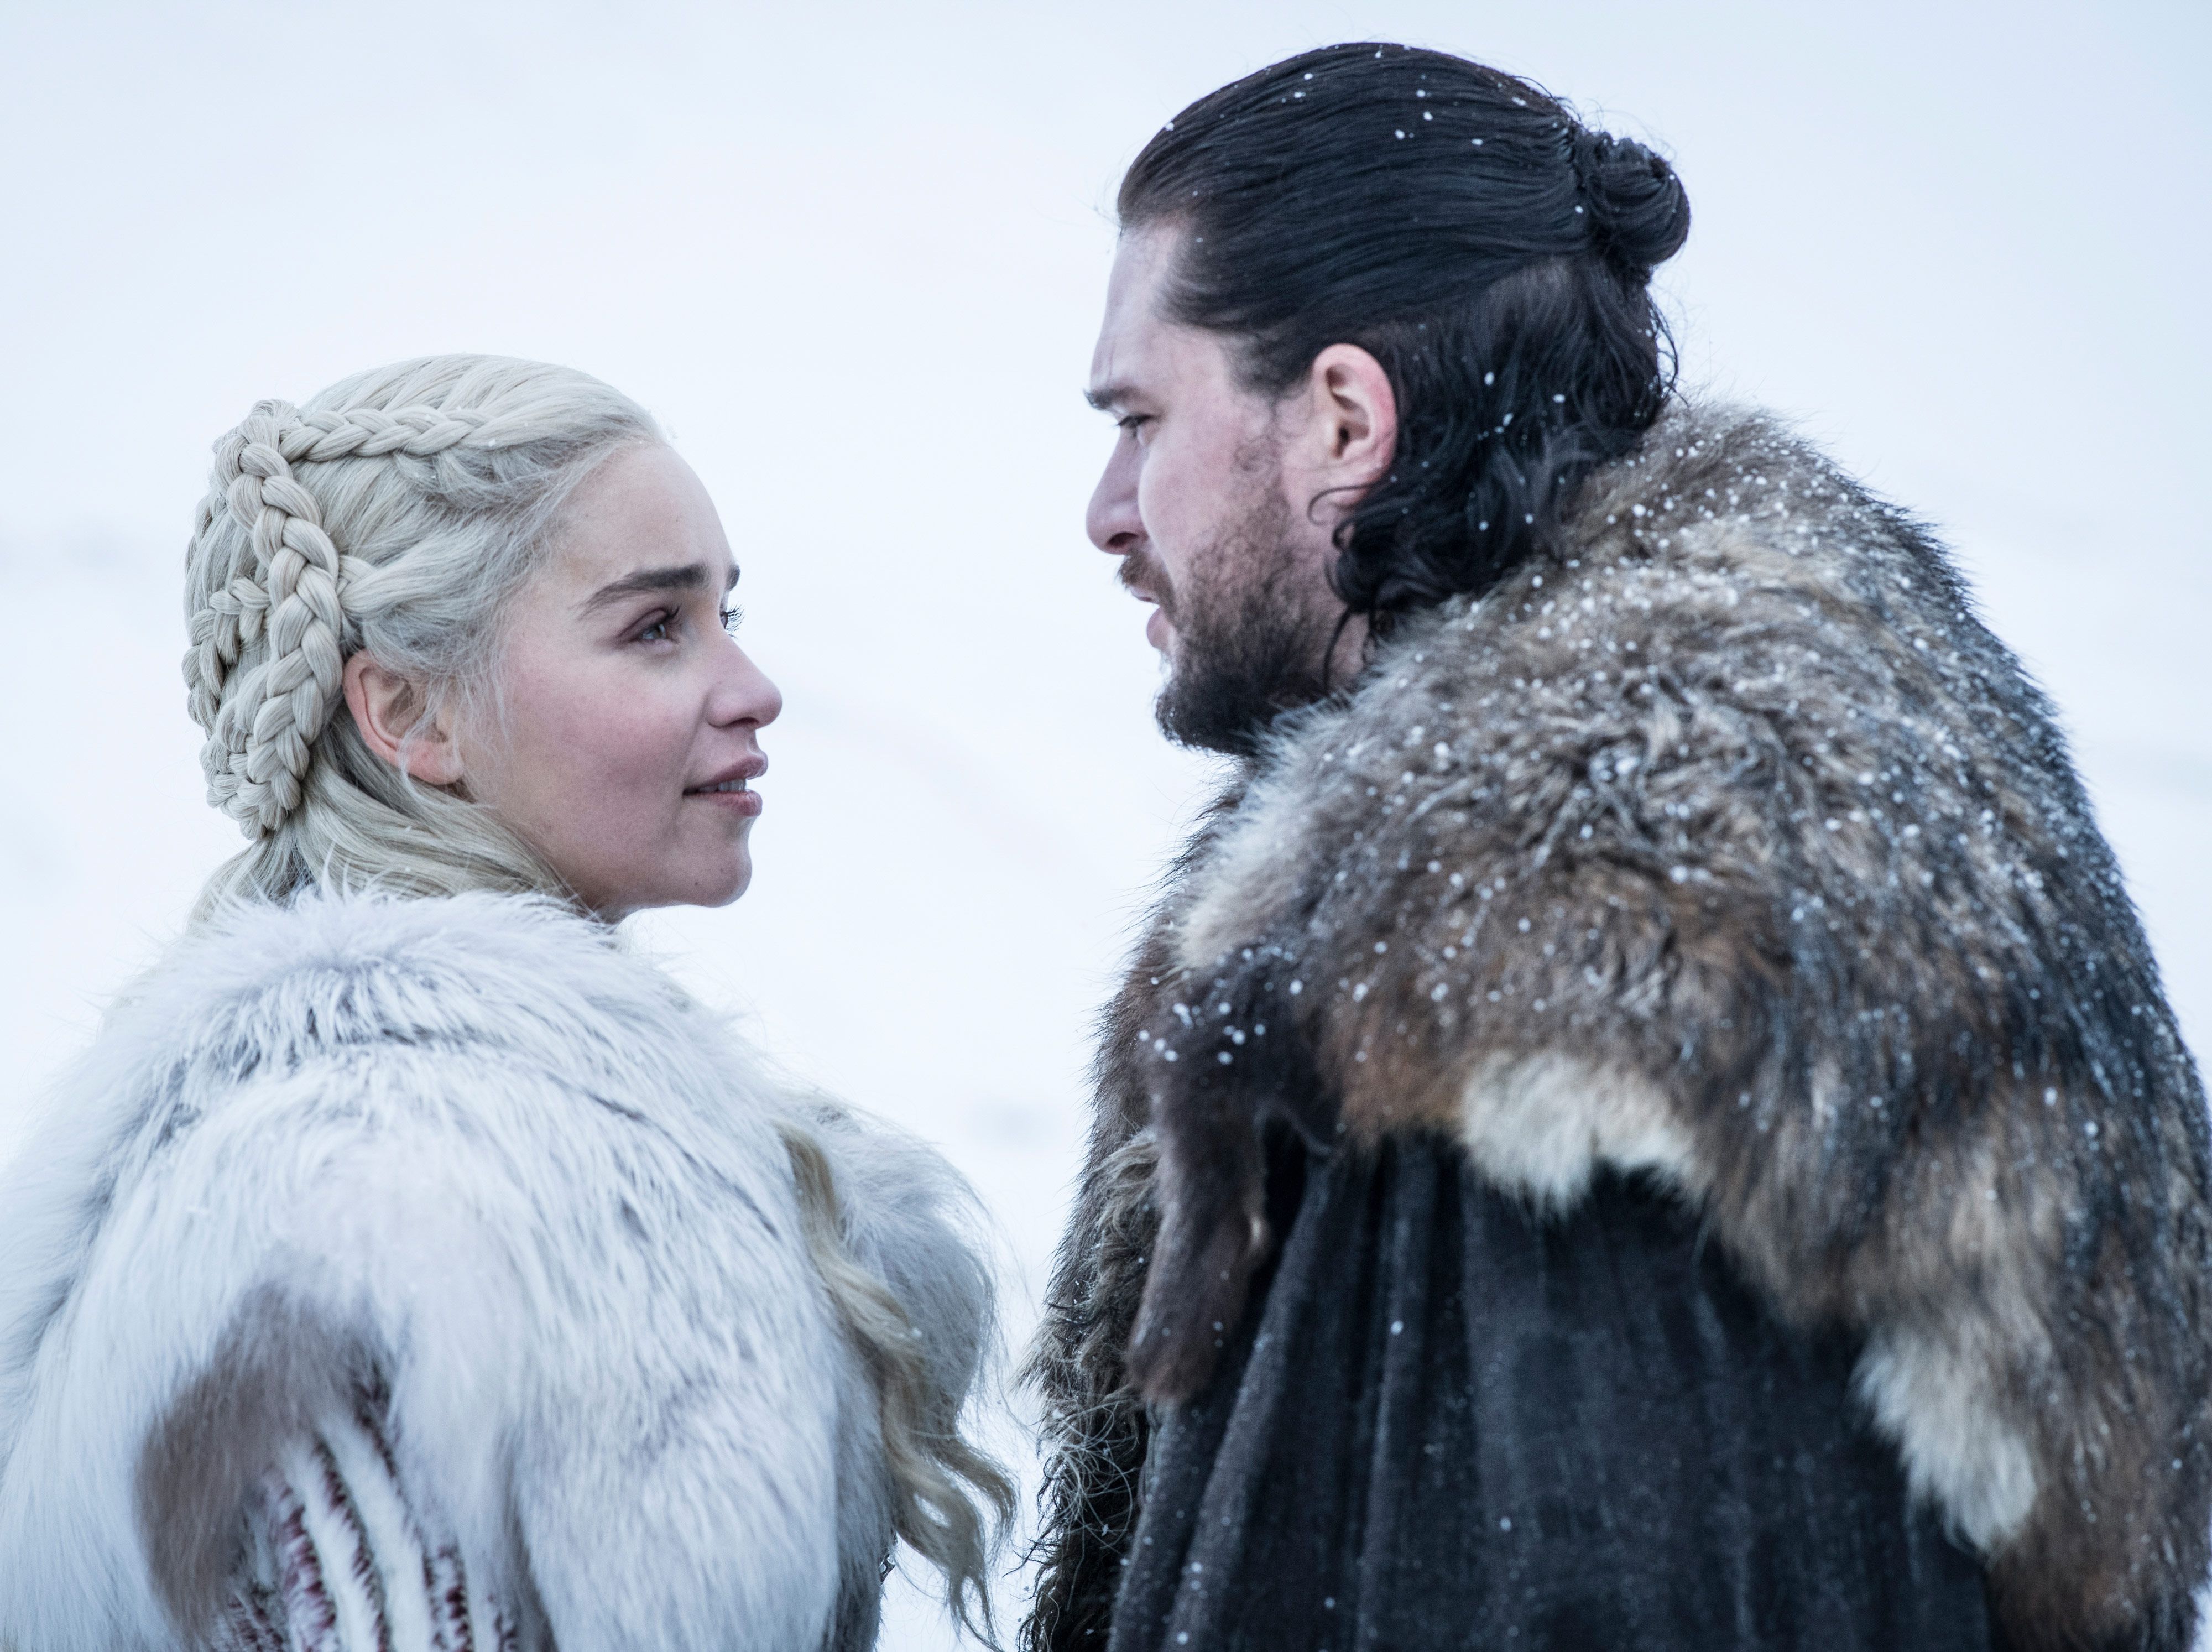 What's next for Game of Thrones after season 8?